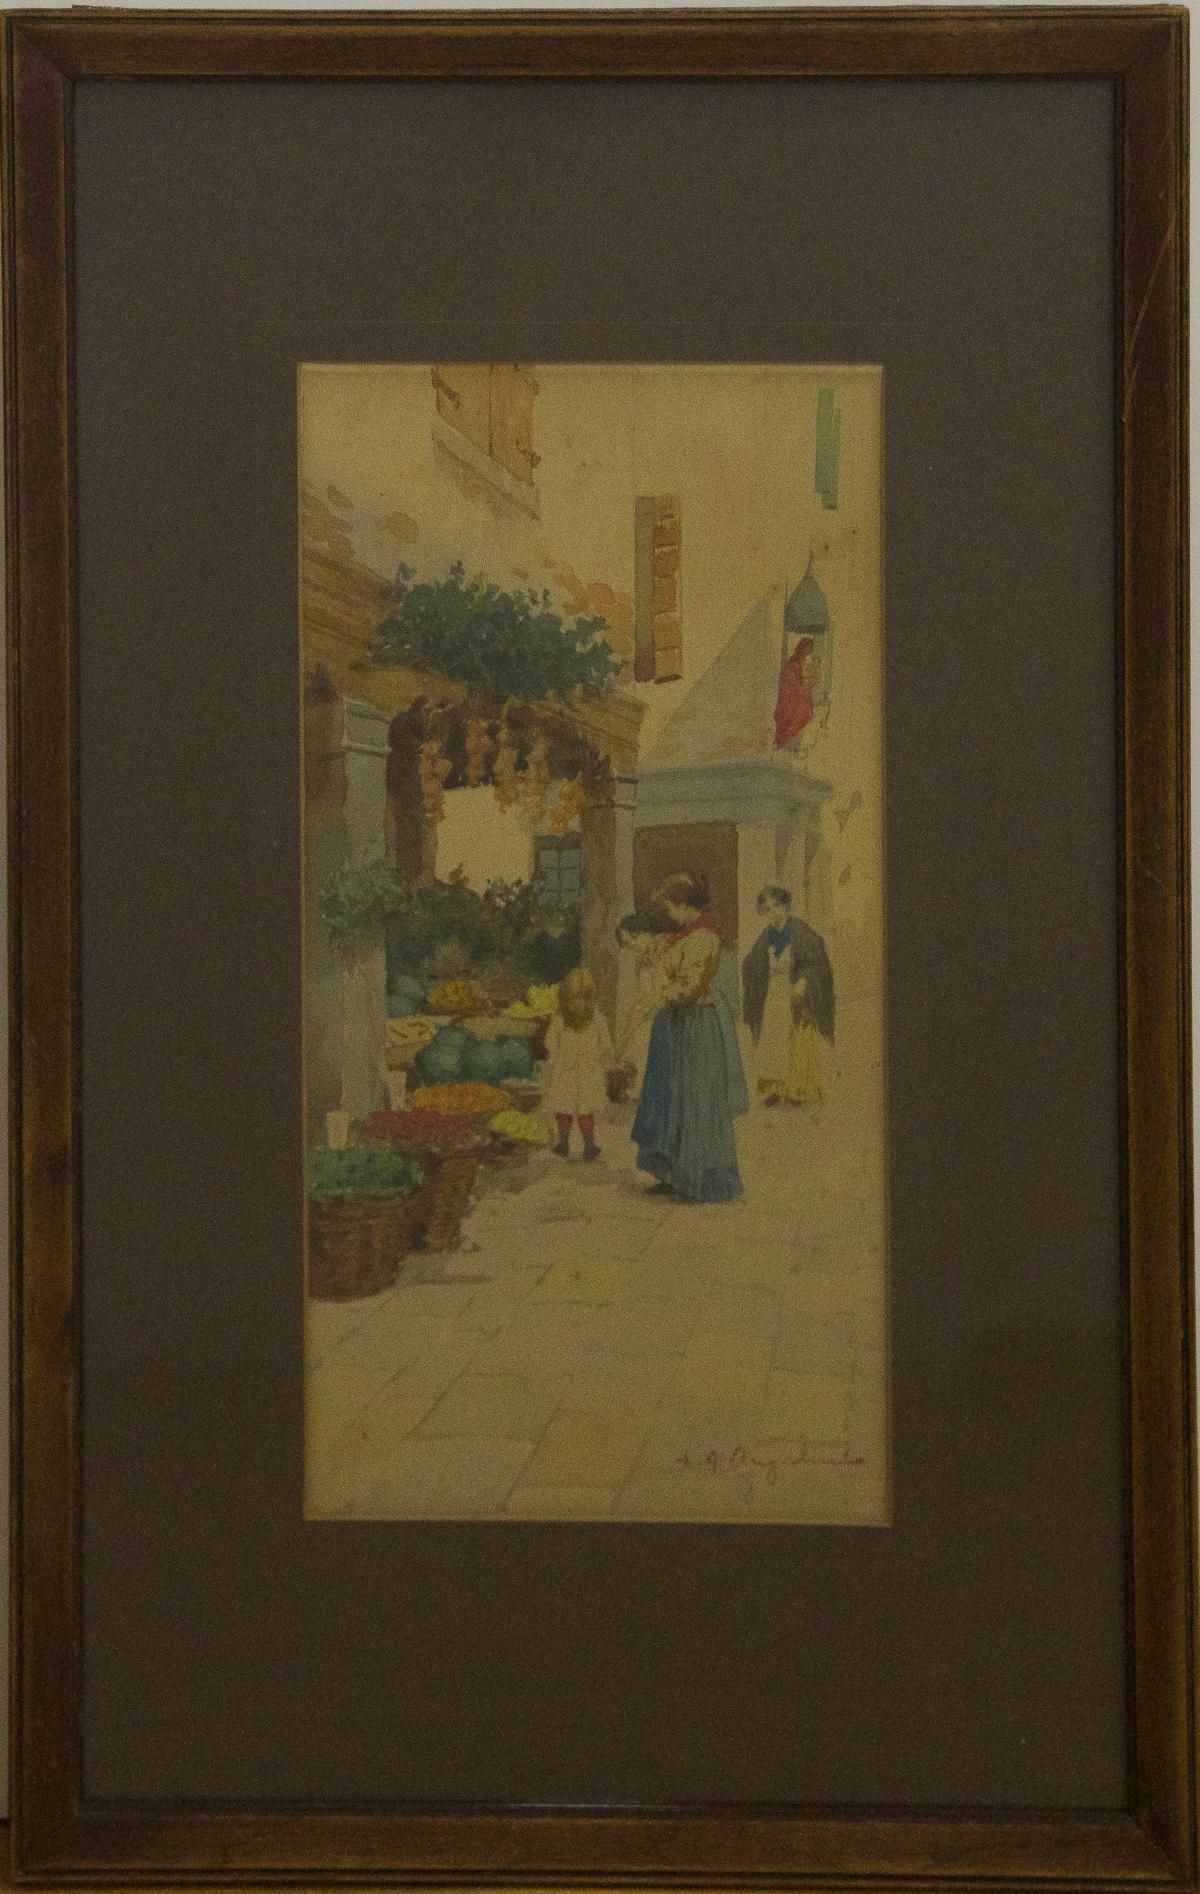 Unknown Landscape Print - Framed, Original Water Color. Untitled, "Marketplace" by Angelini. 